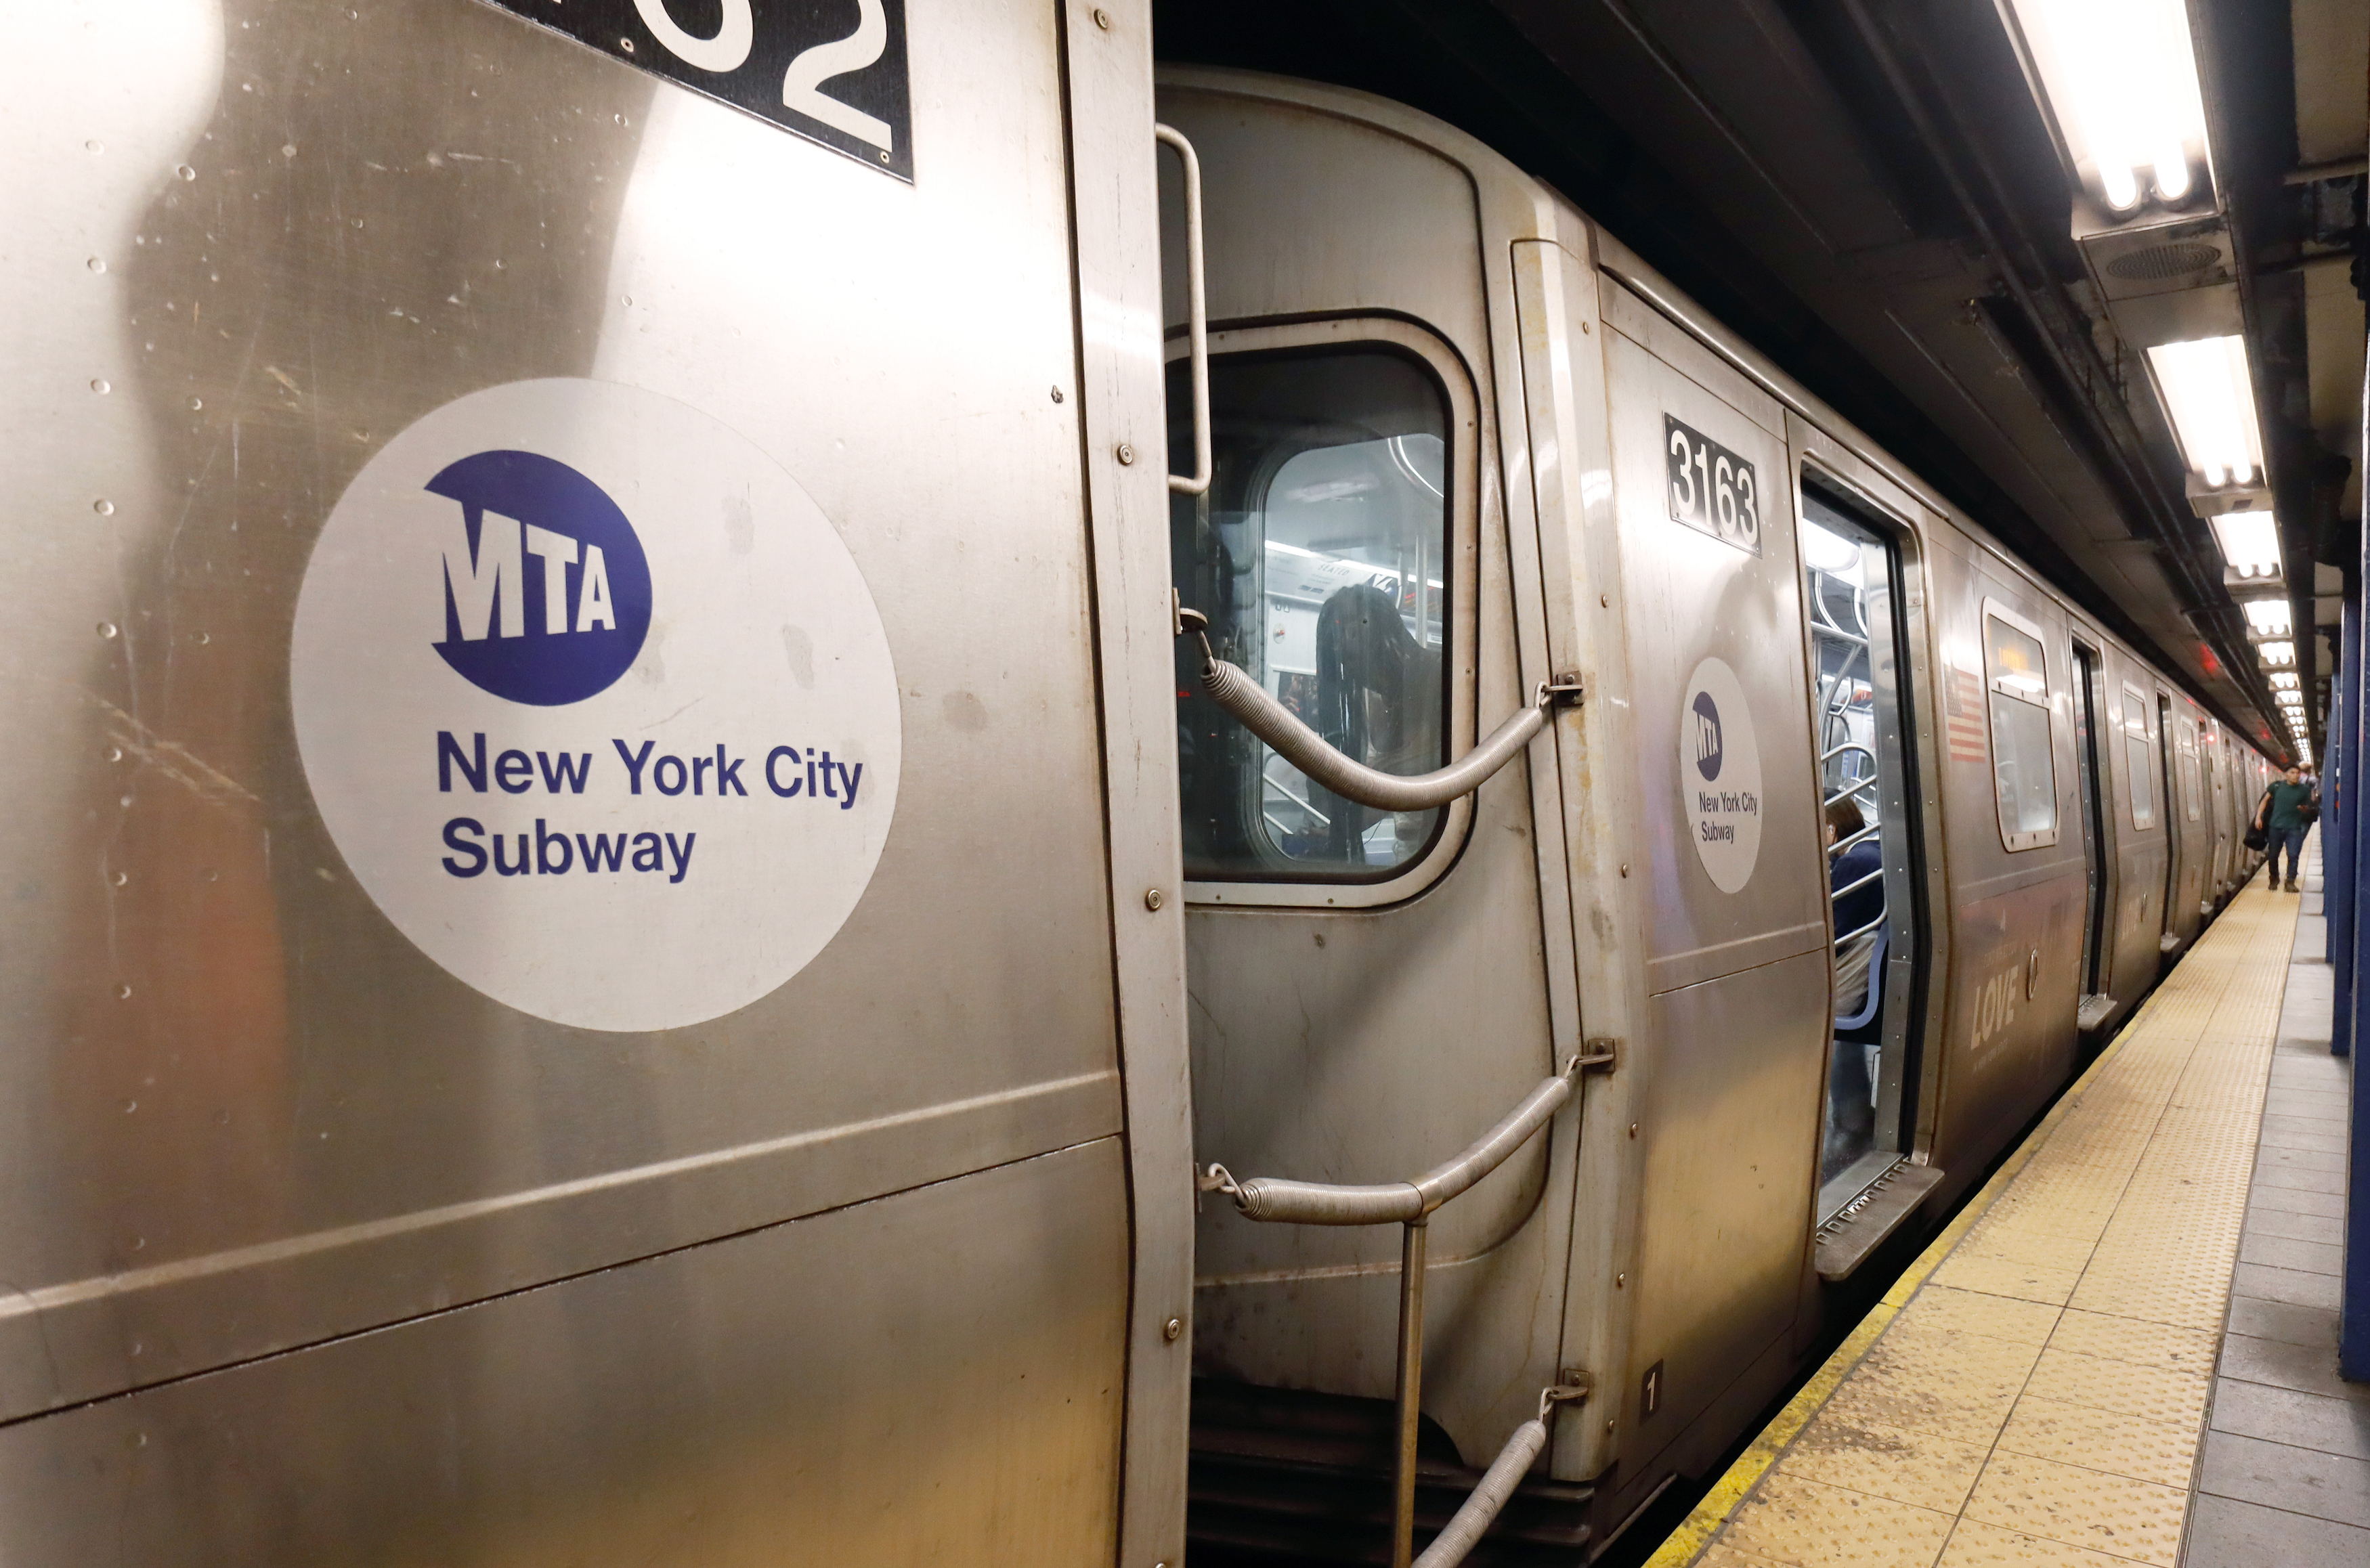 Shocking video shows vagrant being choked to death on NYC subway